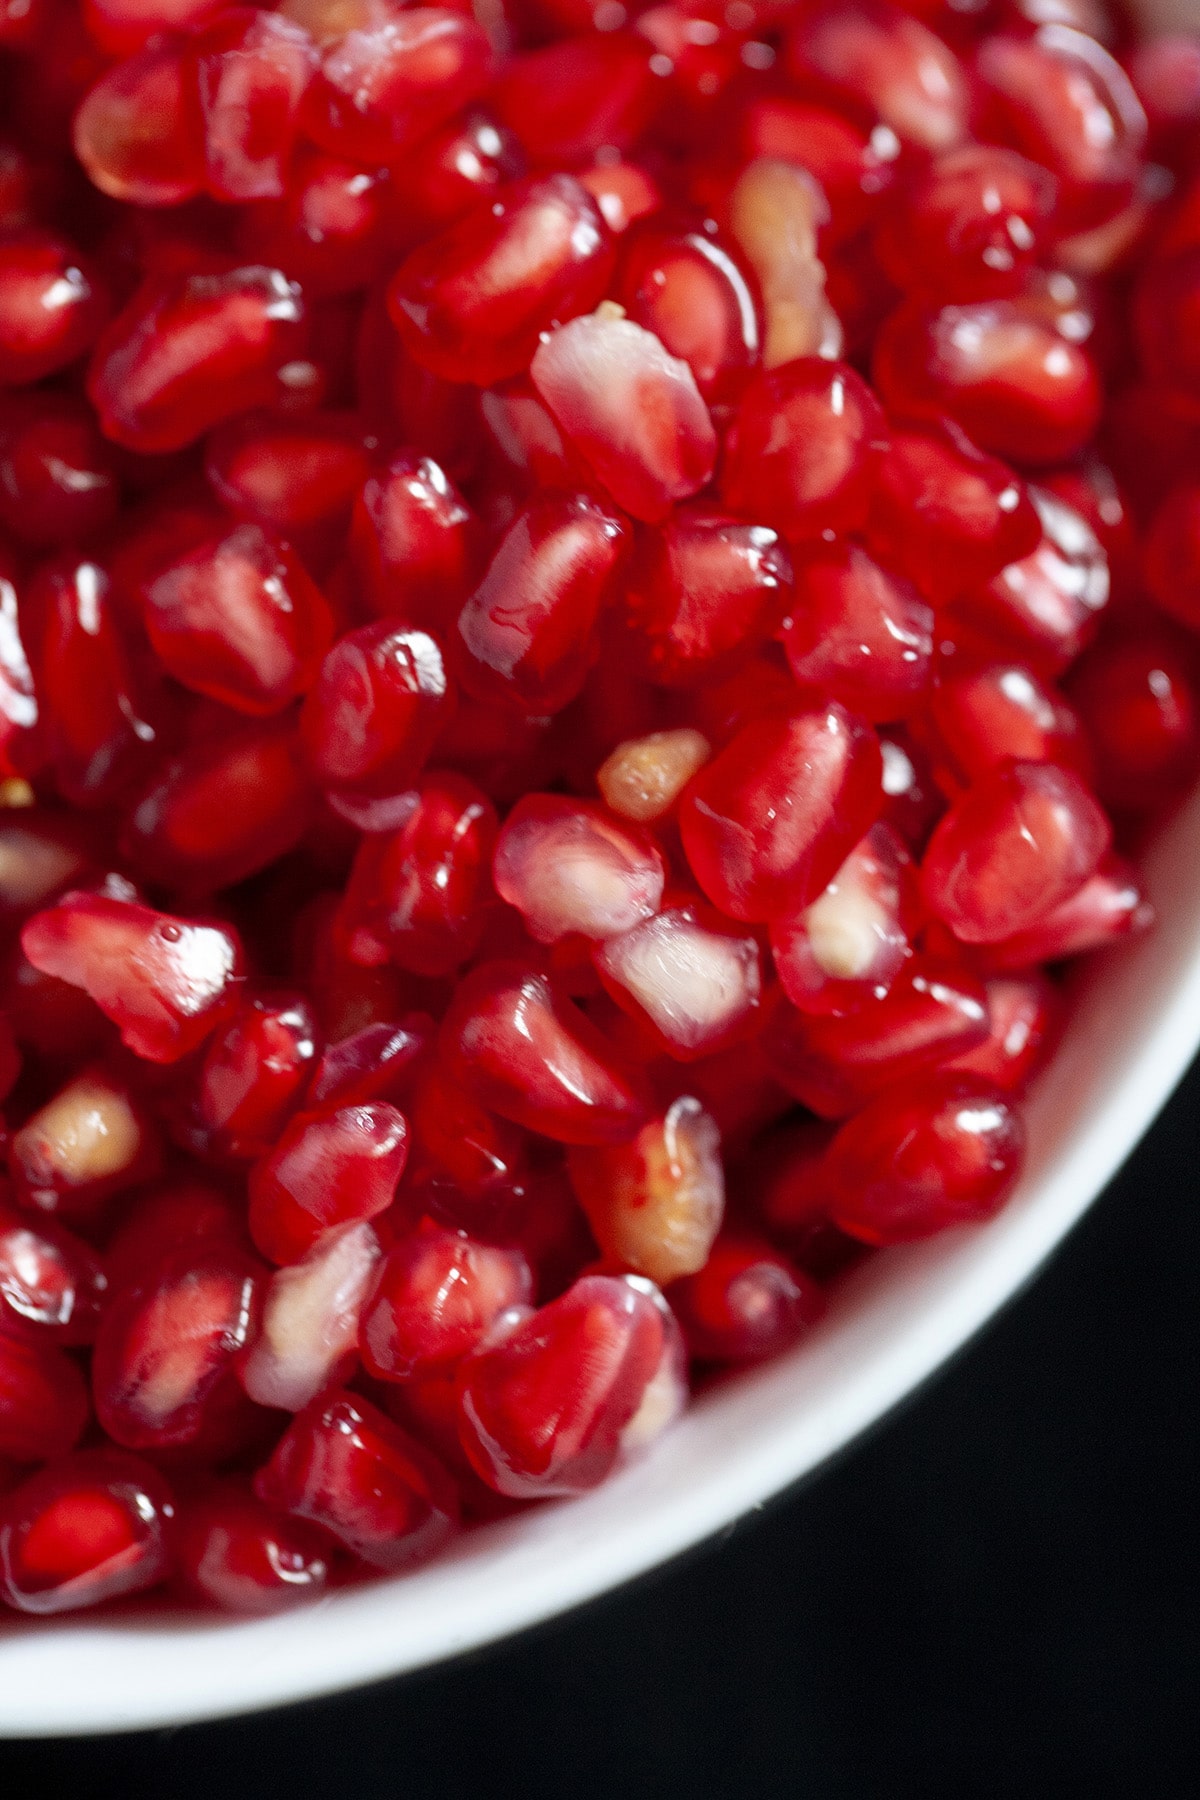 A close up view of a bowl of pomegranate arils.